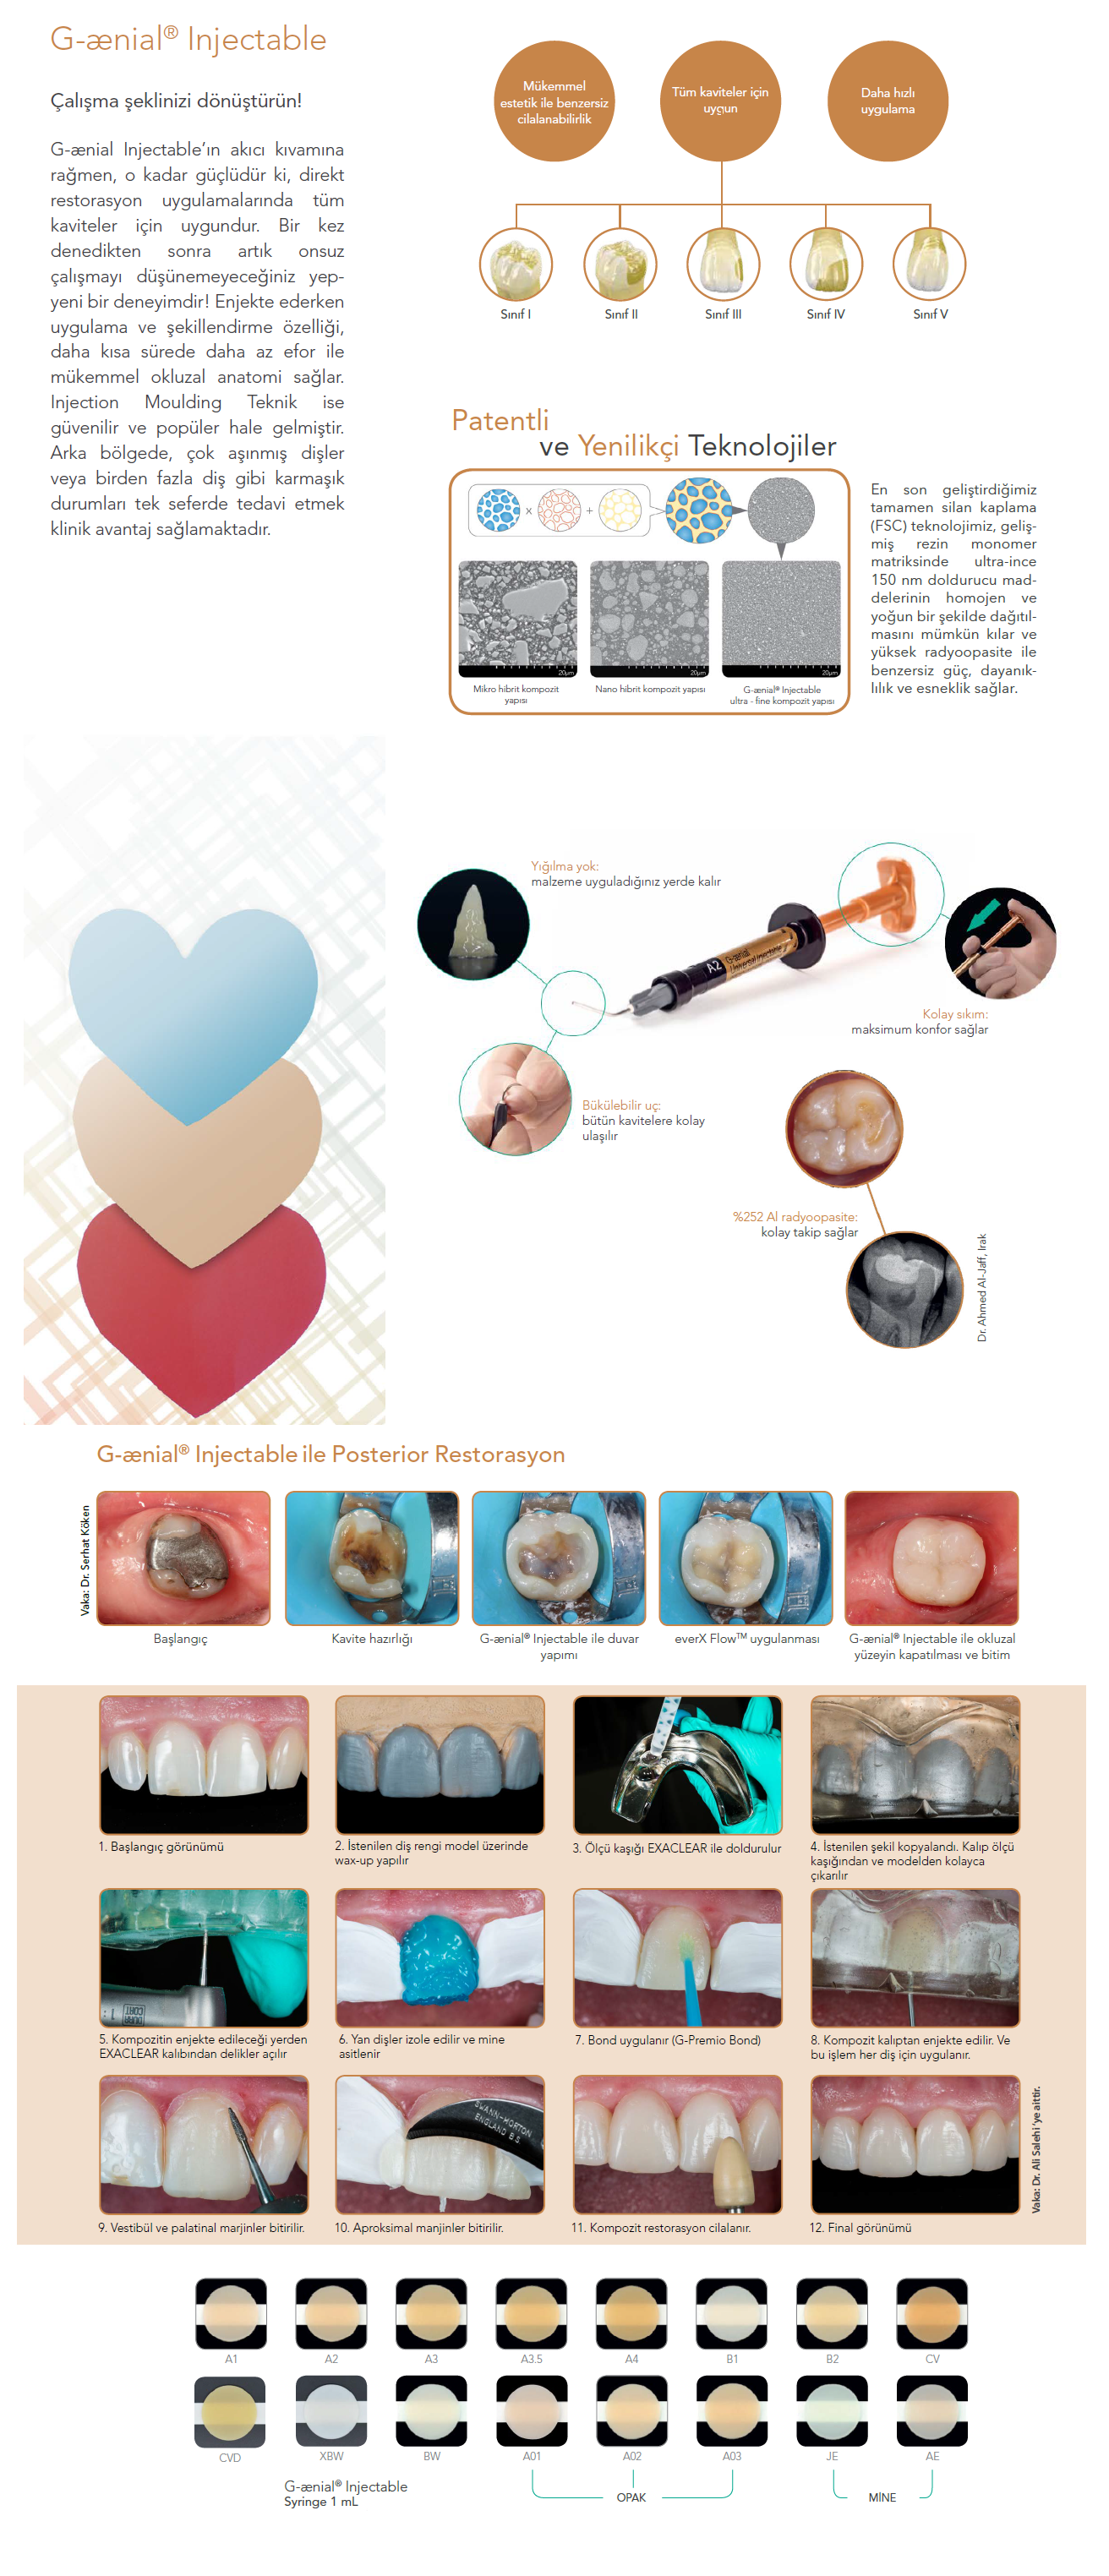 GC Gaenial Injectable